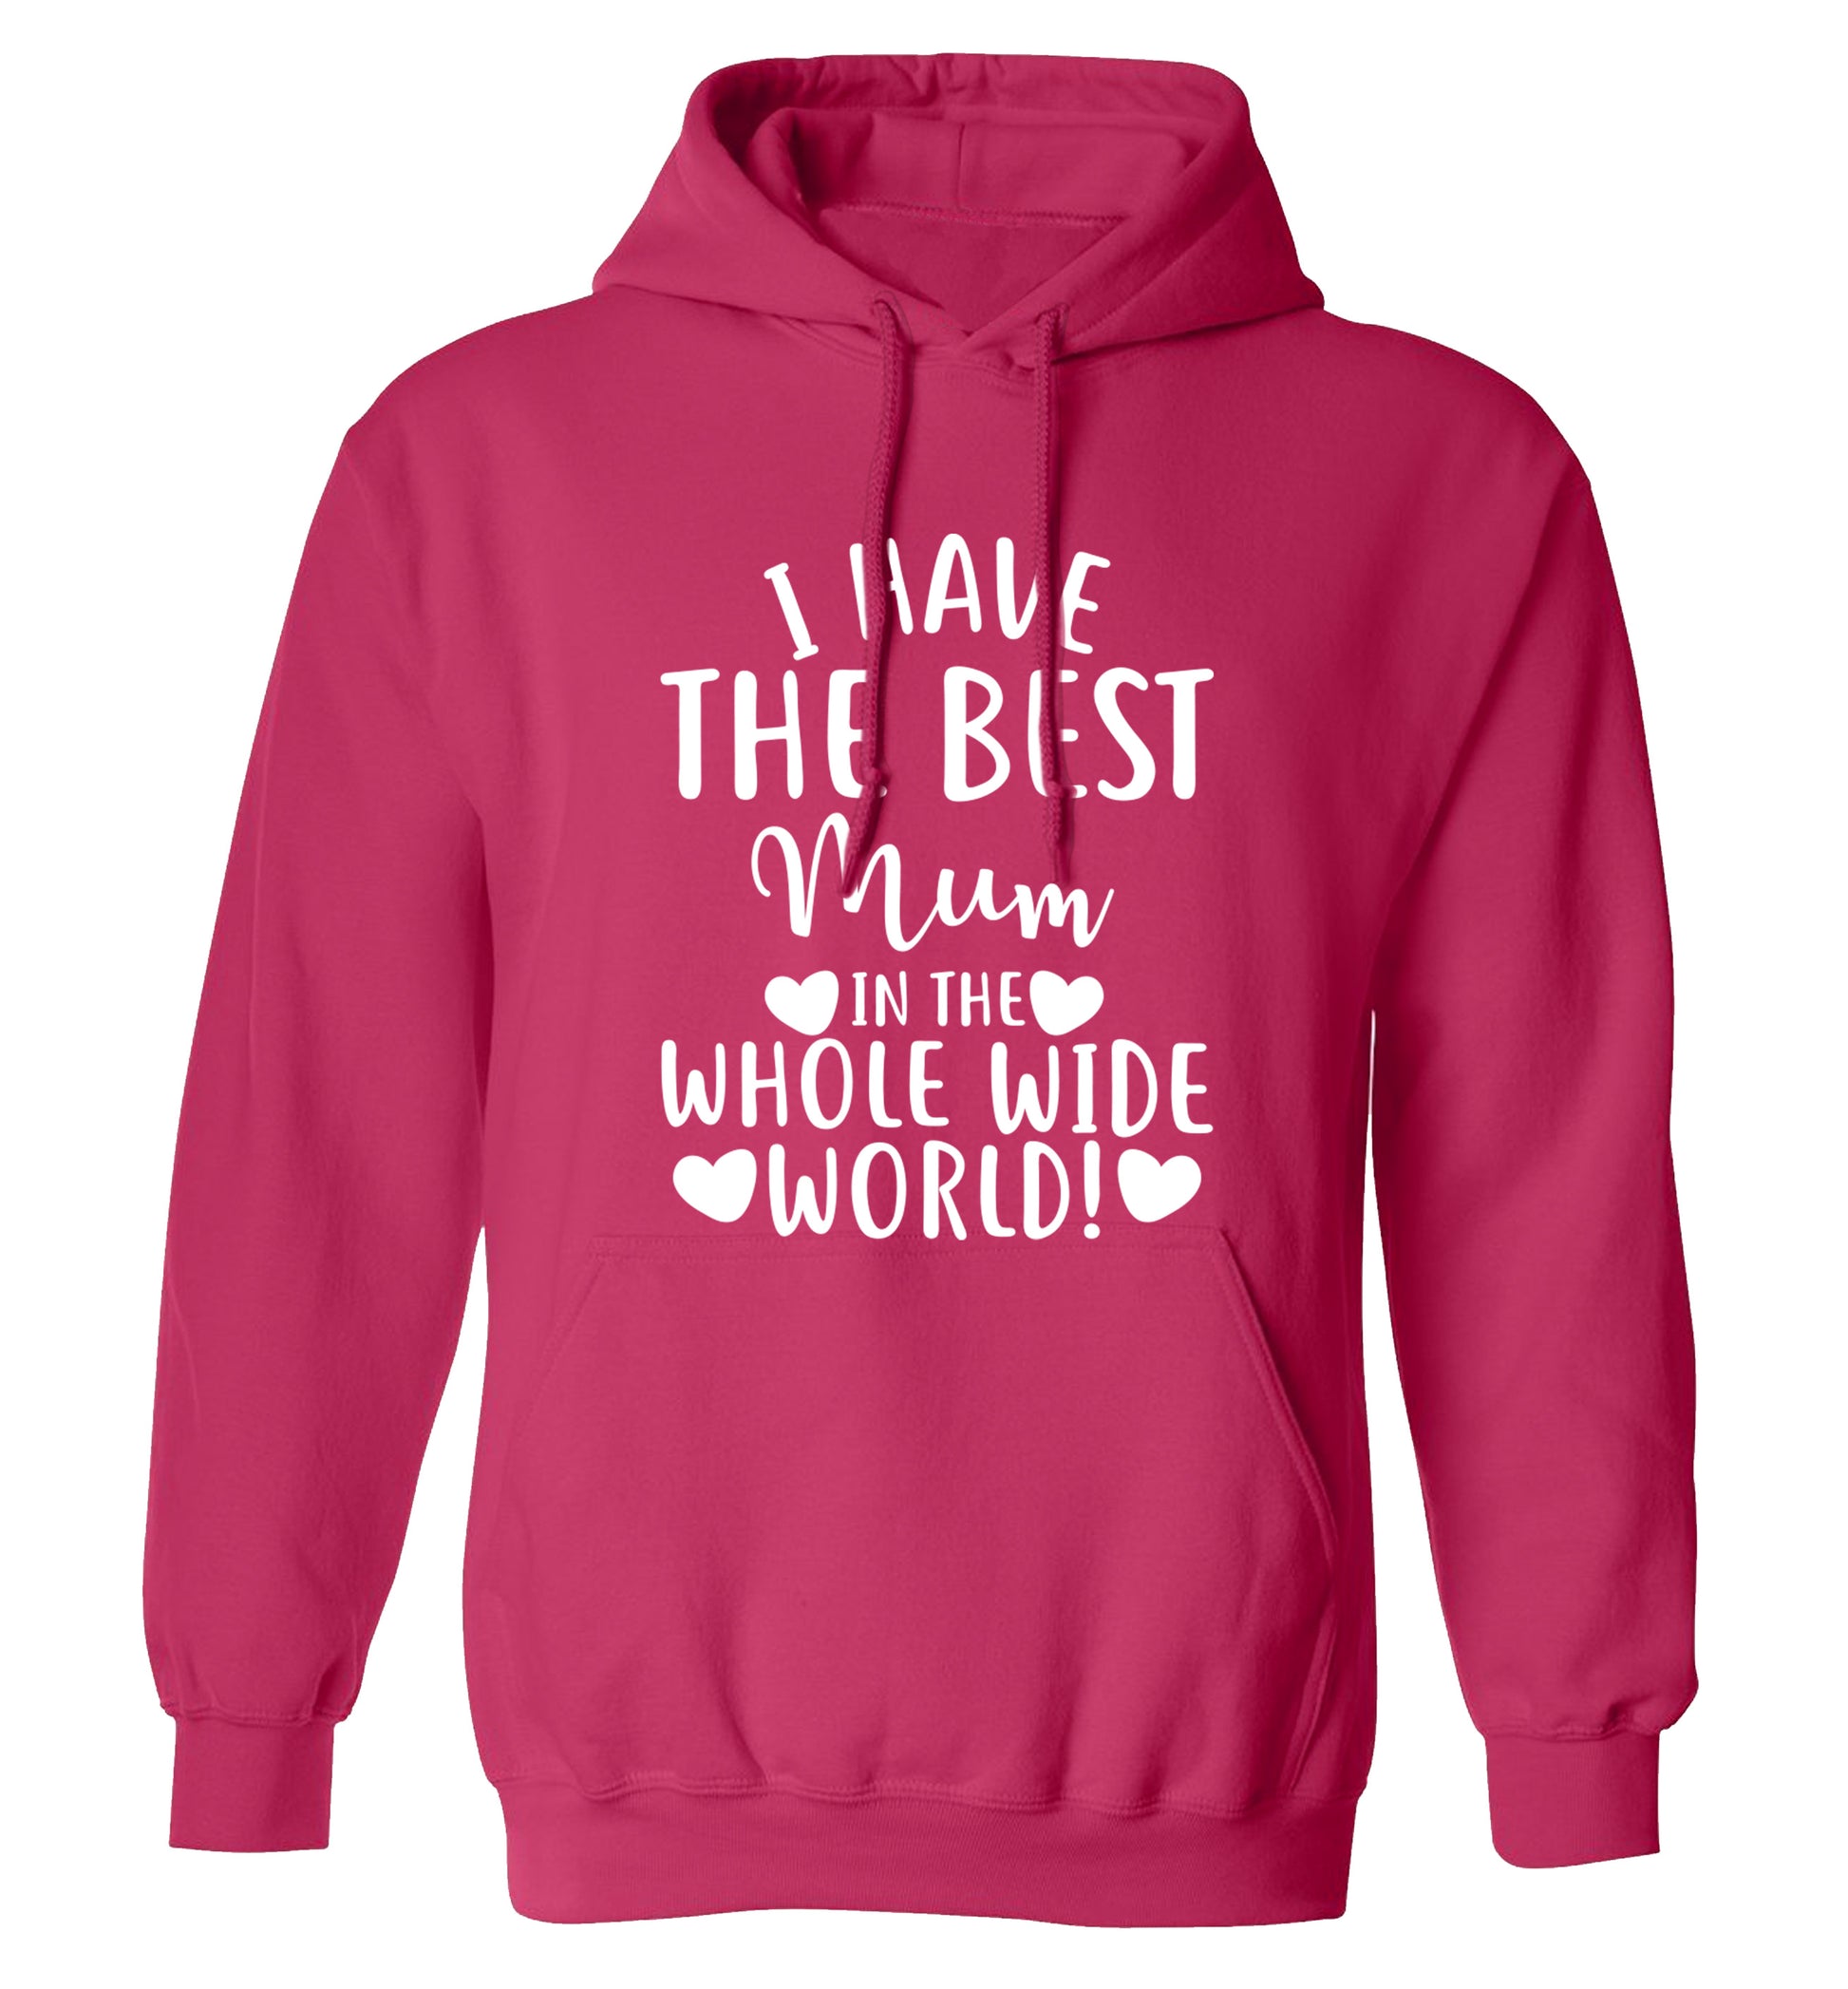 I have the best mum in the whole wide world! adults unisex pink hoodie 2XL